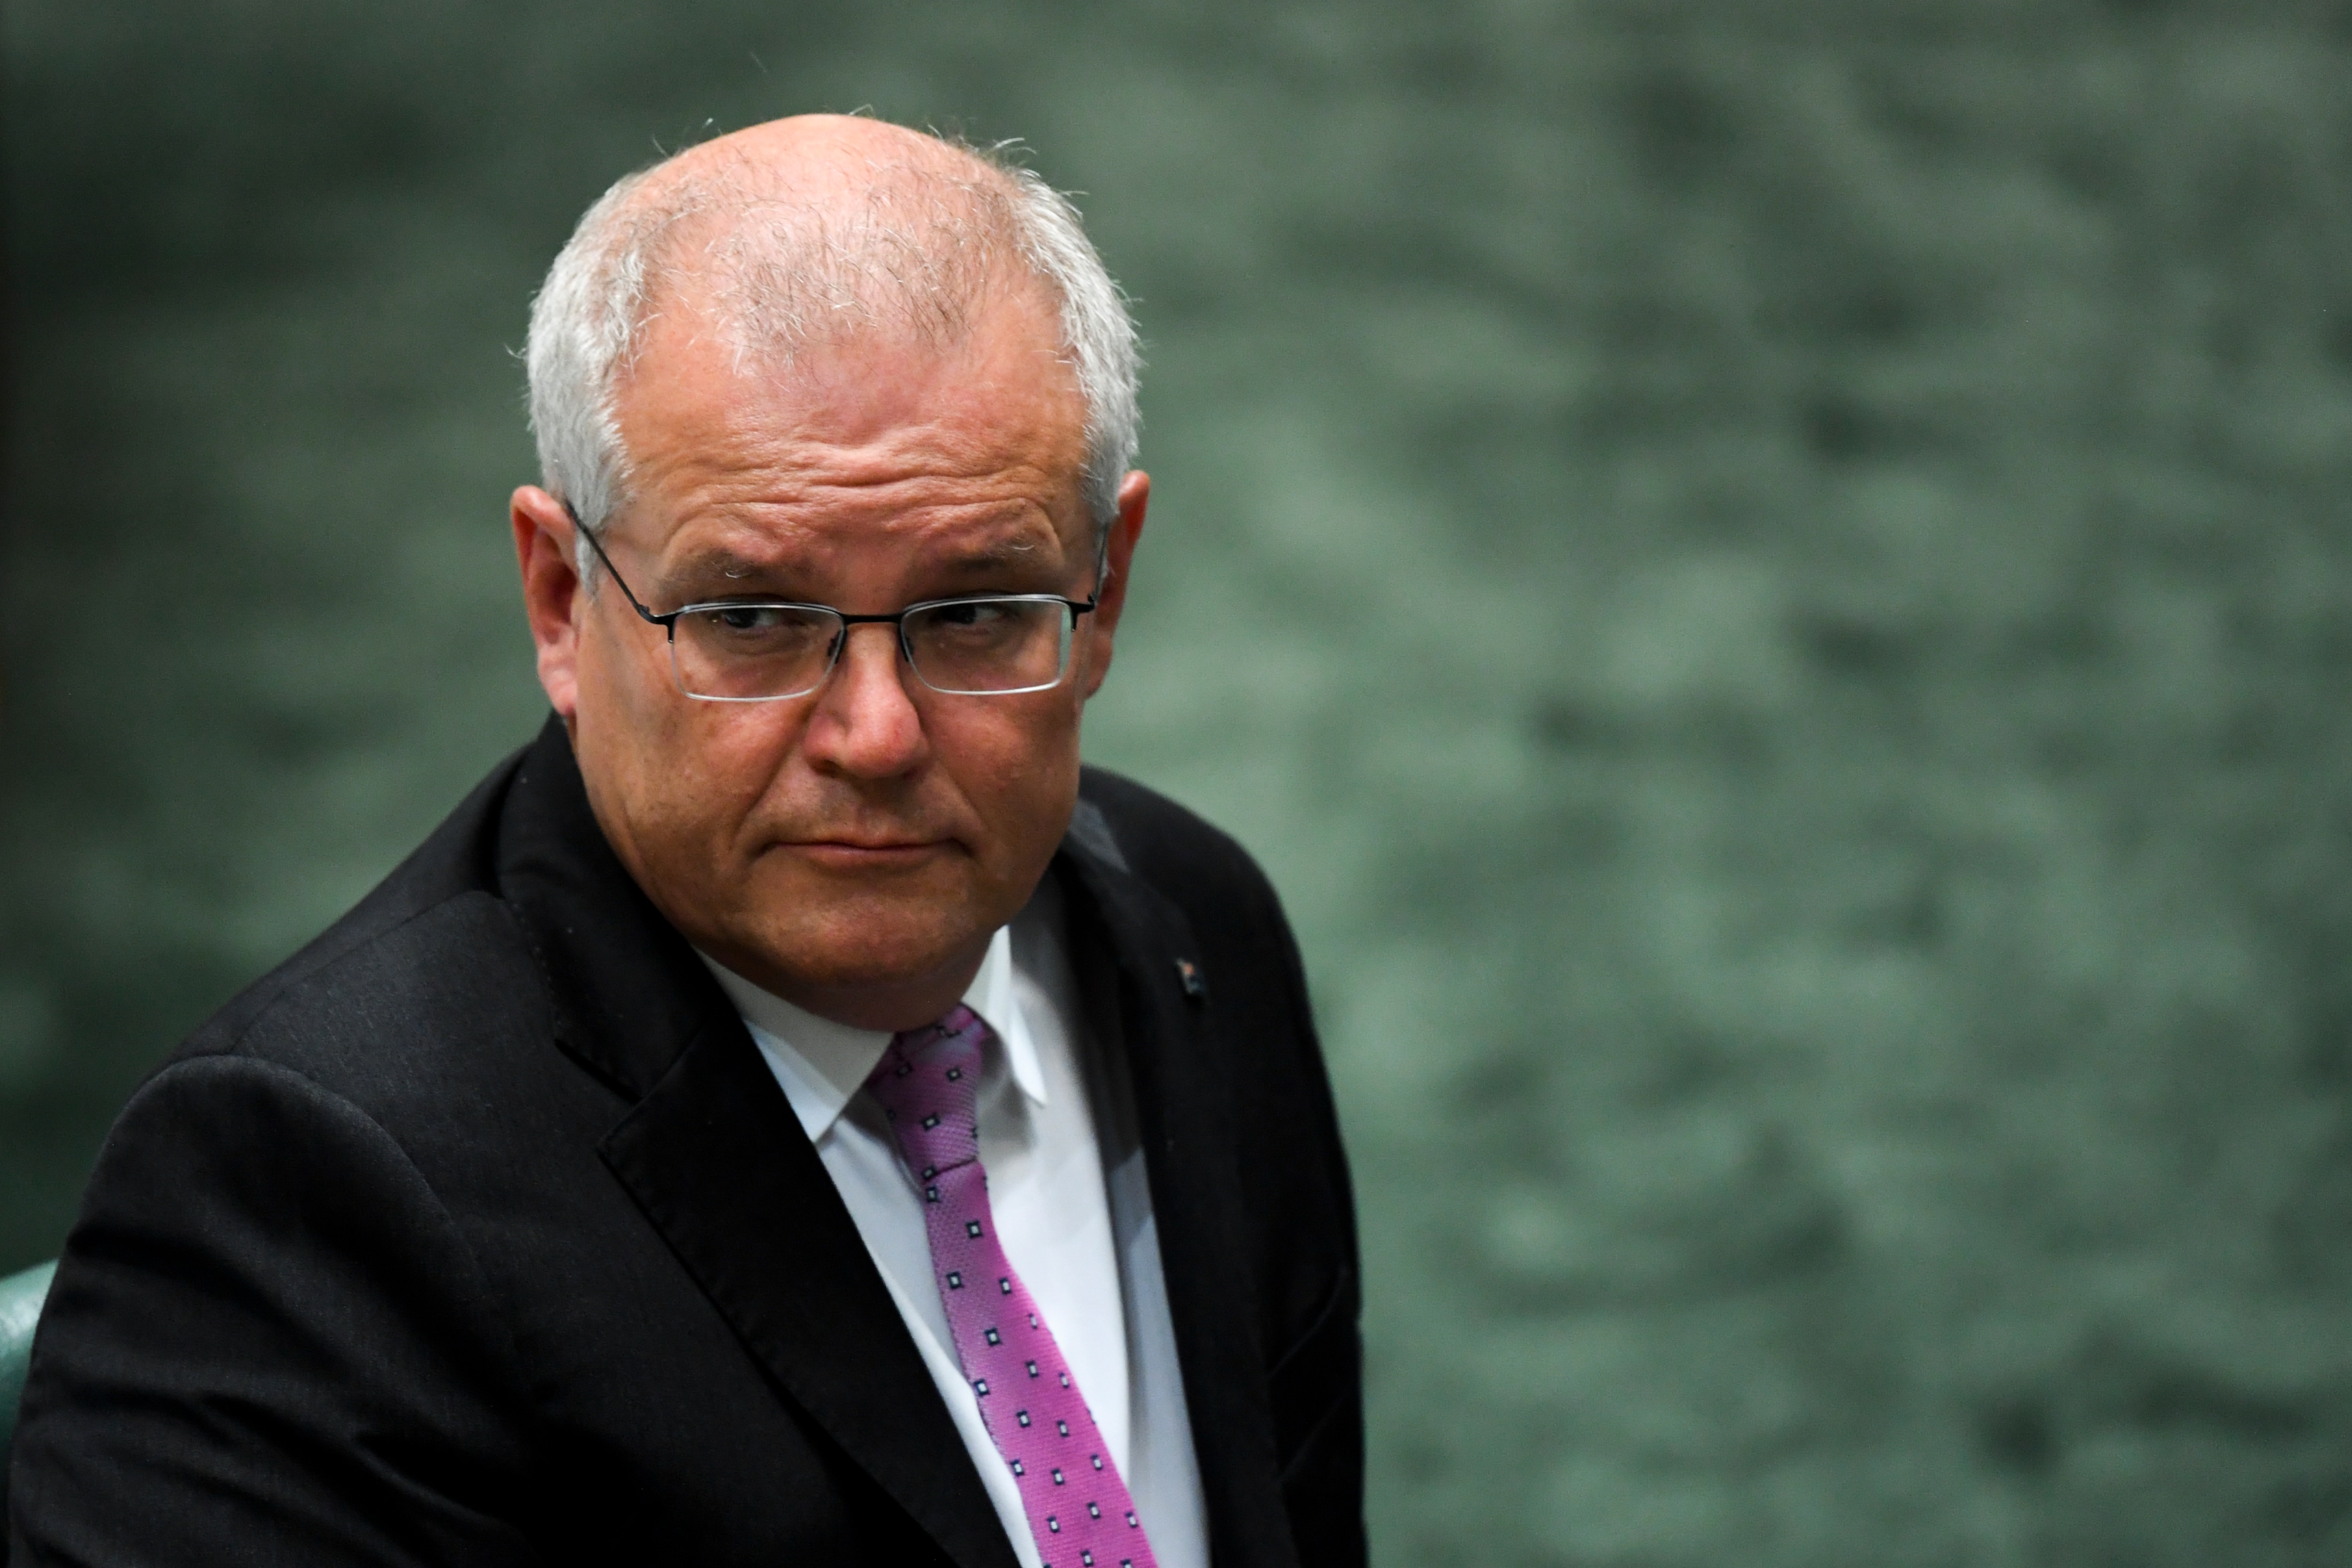 Prime Minister Scott Morrison reacts during Question Time at Parliament House.